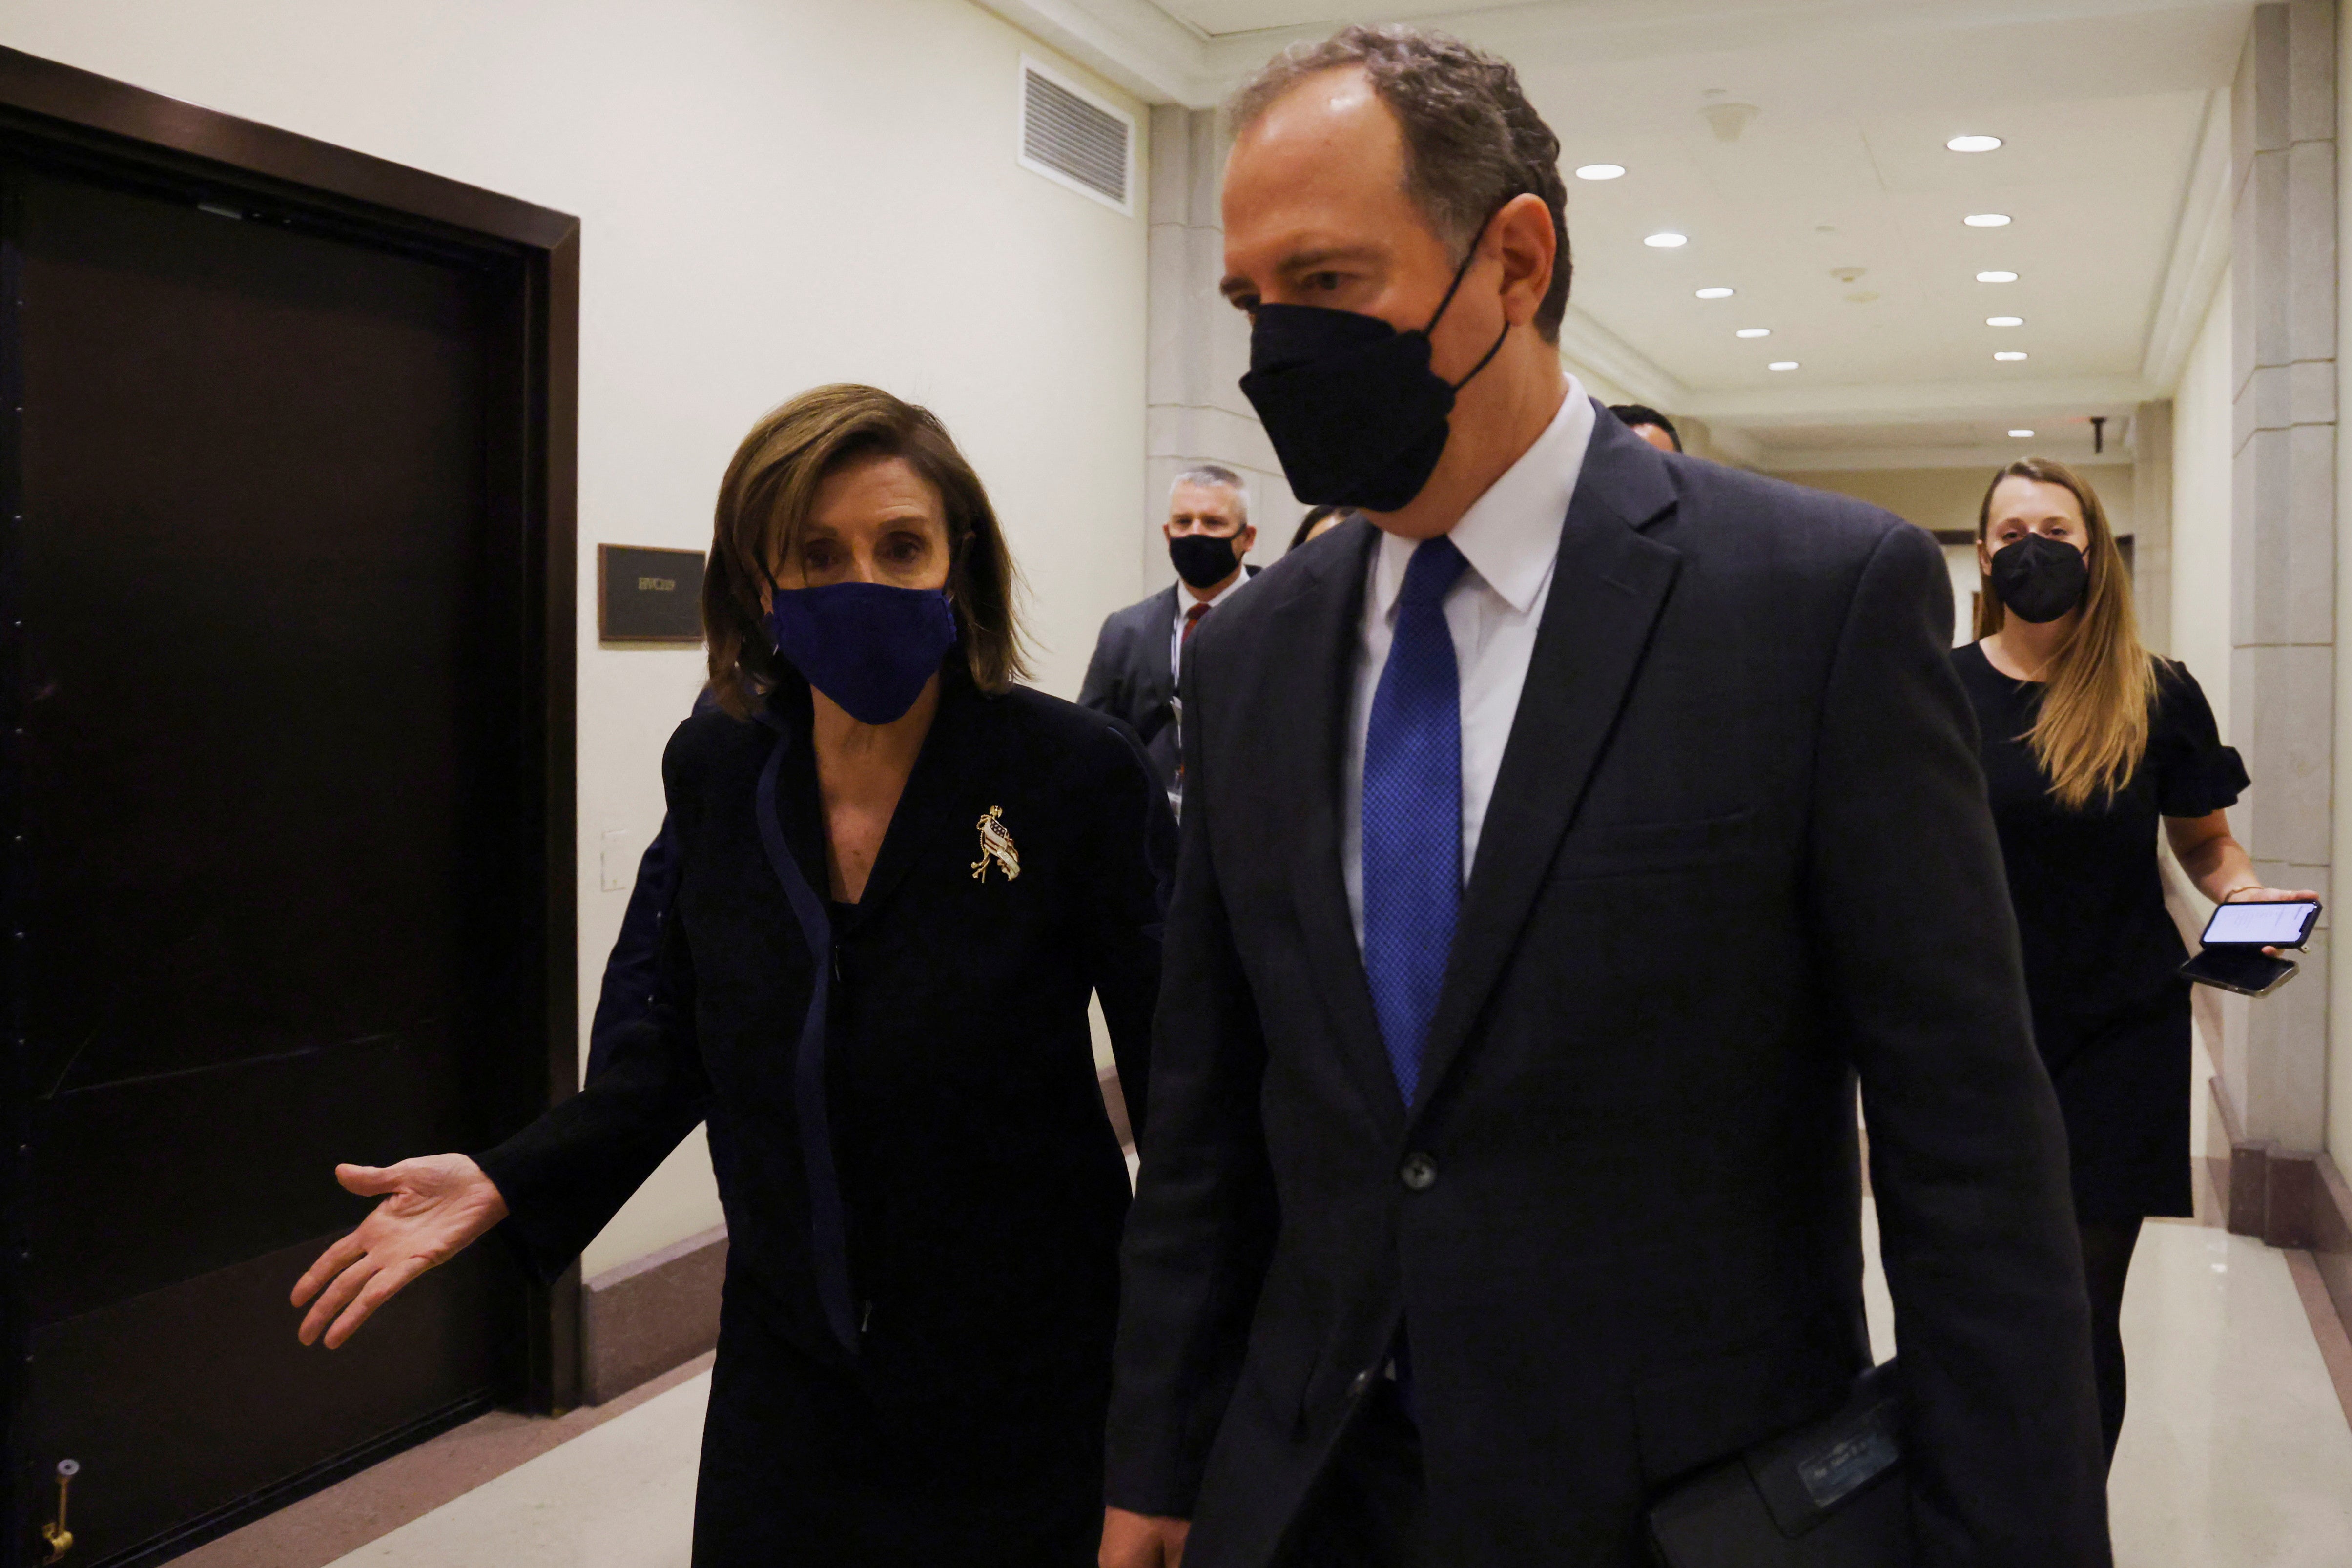 US House Speaker Nancy Pelosi (D-CA) and Representative Adam Schiff (D-CA) arrive for a news conference for their Protecting Our Democracy Act to attempt to create checks and balances on presidential power, on Capitol Hill in Washington, 9 December 2021.